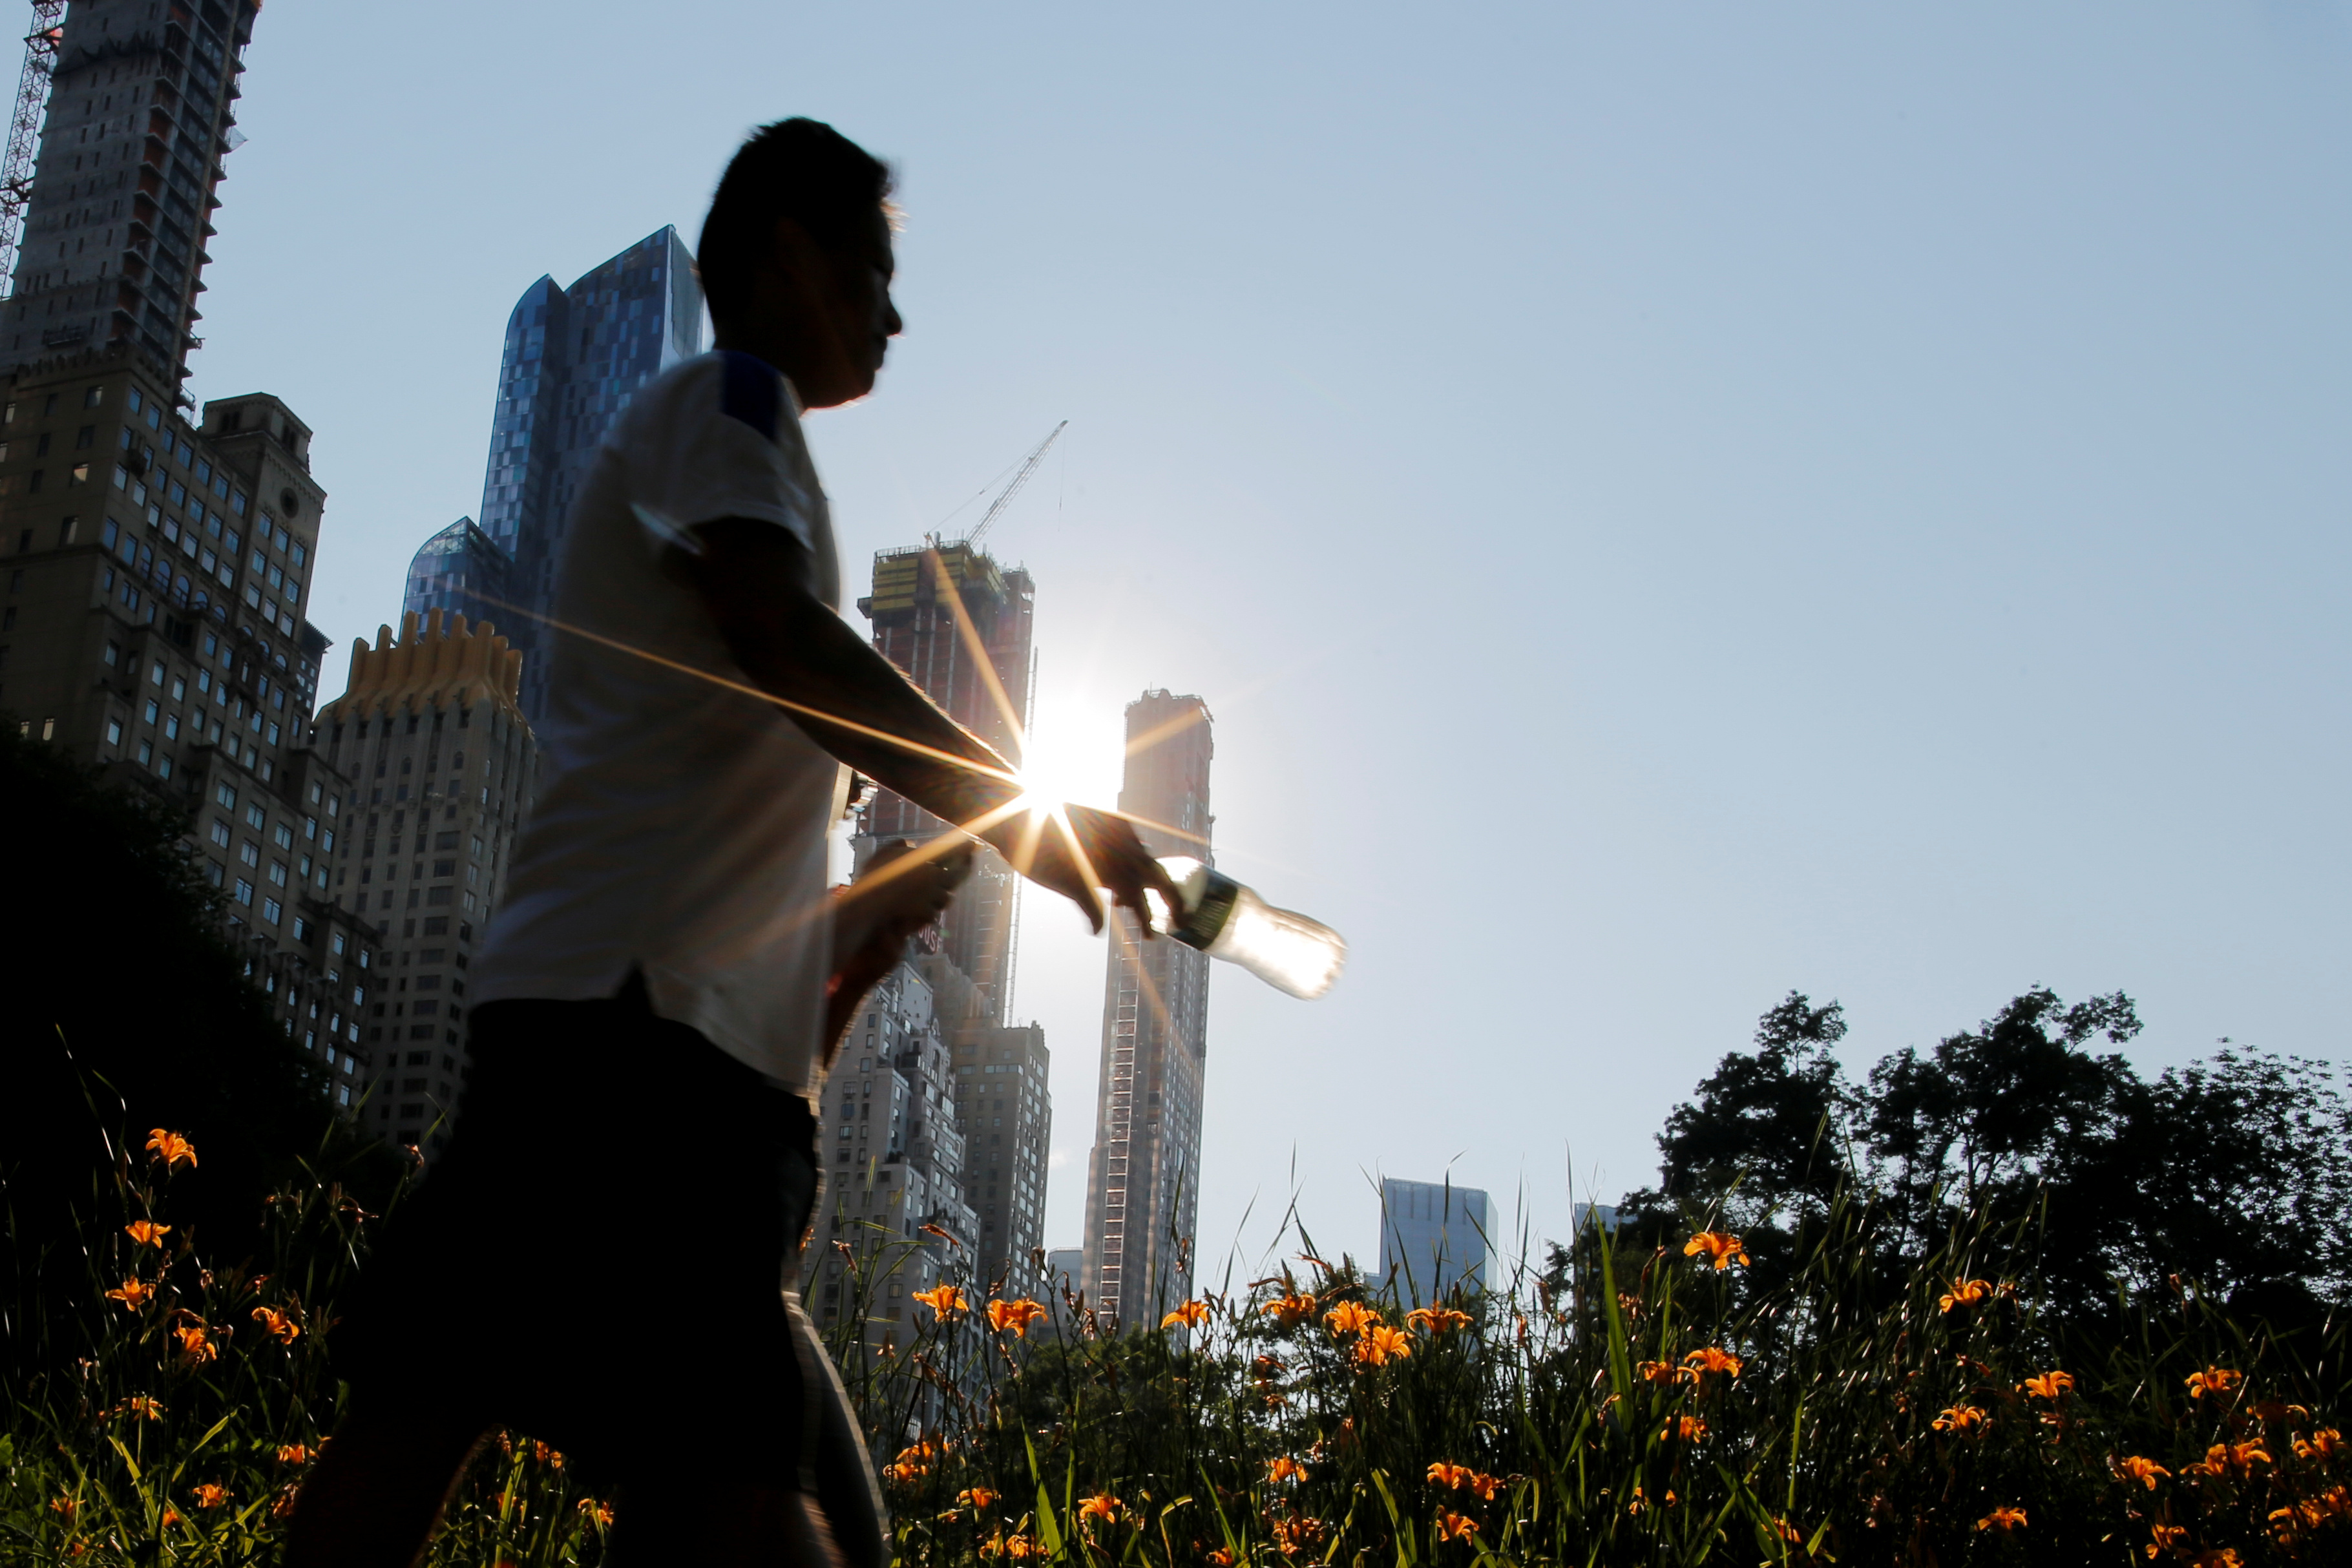 A man carries a bottle of water on a hot summer day in Central Park, Manhattan, New York